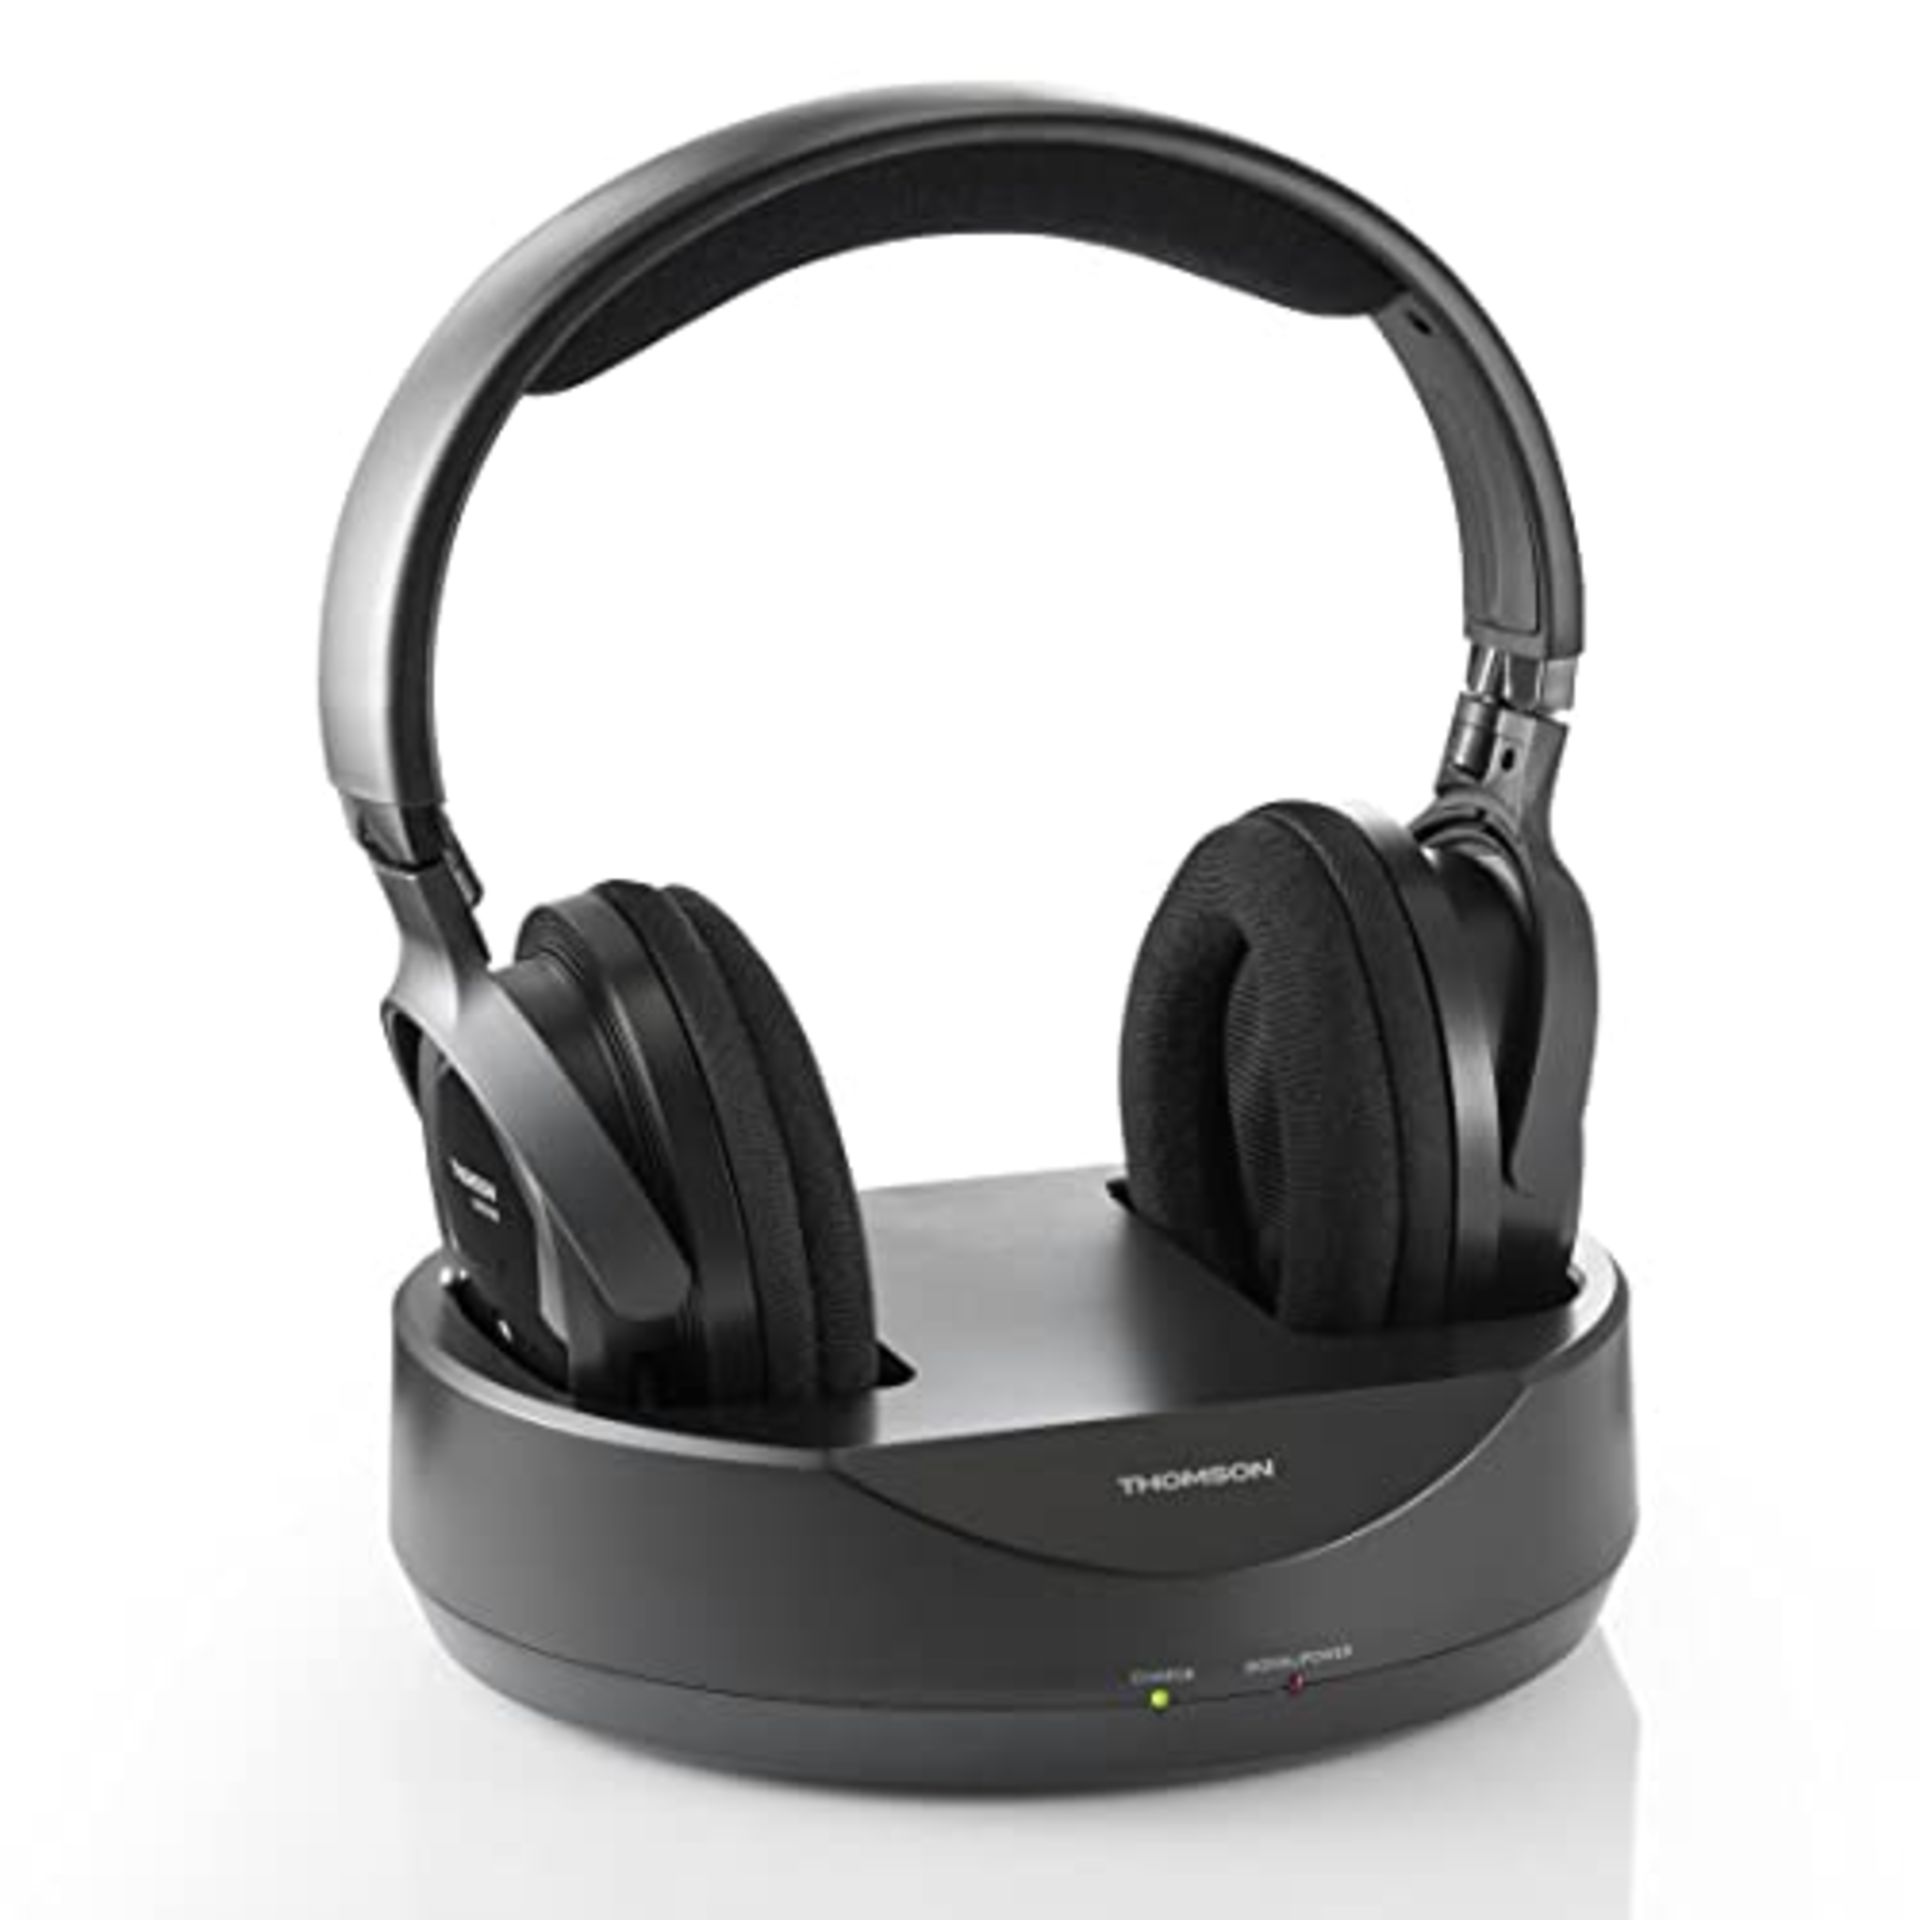 Thomson wireless headphones with charging station (over-ear headphones for TV/TV, wire